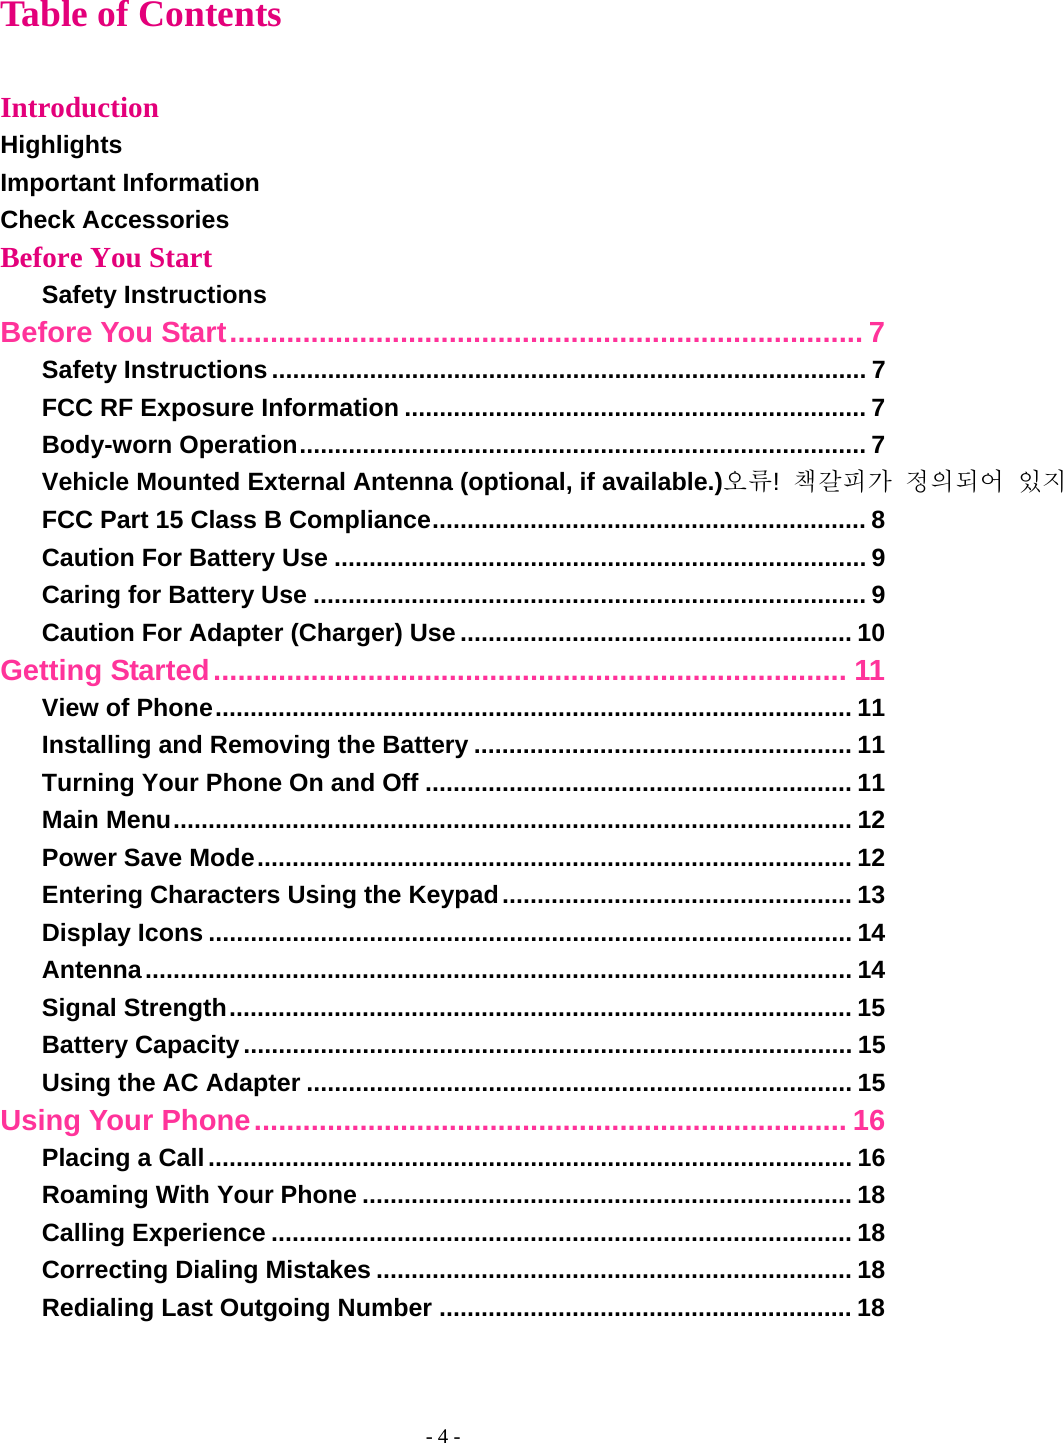 - 4 - Table of Contents  Introduction Highlights Important Information Check Accessories Before You Start Safety Instructions Before You Start .............................................................................. 7 Safety Instructions ..................................................................................... 7 FCC RF Exposure Information .................................................................. 7 Body-worn Operation ................................................................................. 7 Vehicle Mounted External Antenna (optional, if available.)오류!  책갈피가 정의되어 있지FCC Part 15 Class B Compliance .............................................................. 8 Caution For Battery Use ............................................................................ 9 Caring for Battery Use ............................................................................... 9 Caution For Adapter (Charger) Use ........................................................ 10 Getting Started .............................................................................. 11 View of Phone ...........................................................................................  11 Installing and Removing the Battery ...................................................... 11 Turning Your Phone On and Off ............................................................. 11 Main Menu ................................................................................................. 12 Power Save Mode .....................................................................................  12 Entering Characters Using the Keypad .................................................. 13 Display Icons ............................................................................................ 14 Antenna ..................................................................................................... 14 Signal Strength .........................................................................................  15 Battery Capacity ....................................................................................... 15 Using the AC Adapter .............................................................................. 15 Using Your Phone ......................................................................... 16 Placing a Call ............................................................................................ 16 Roaming With Your Phone ...................................................................... 18 Calling Experience ................................................................................... 18 Correcting Dialing Mistakes .................................................................... 18 Redialing Last Outgoing Number ........................................................... 18 